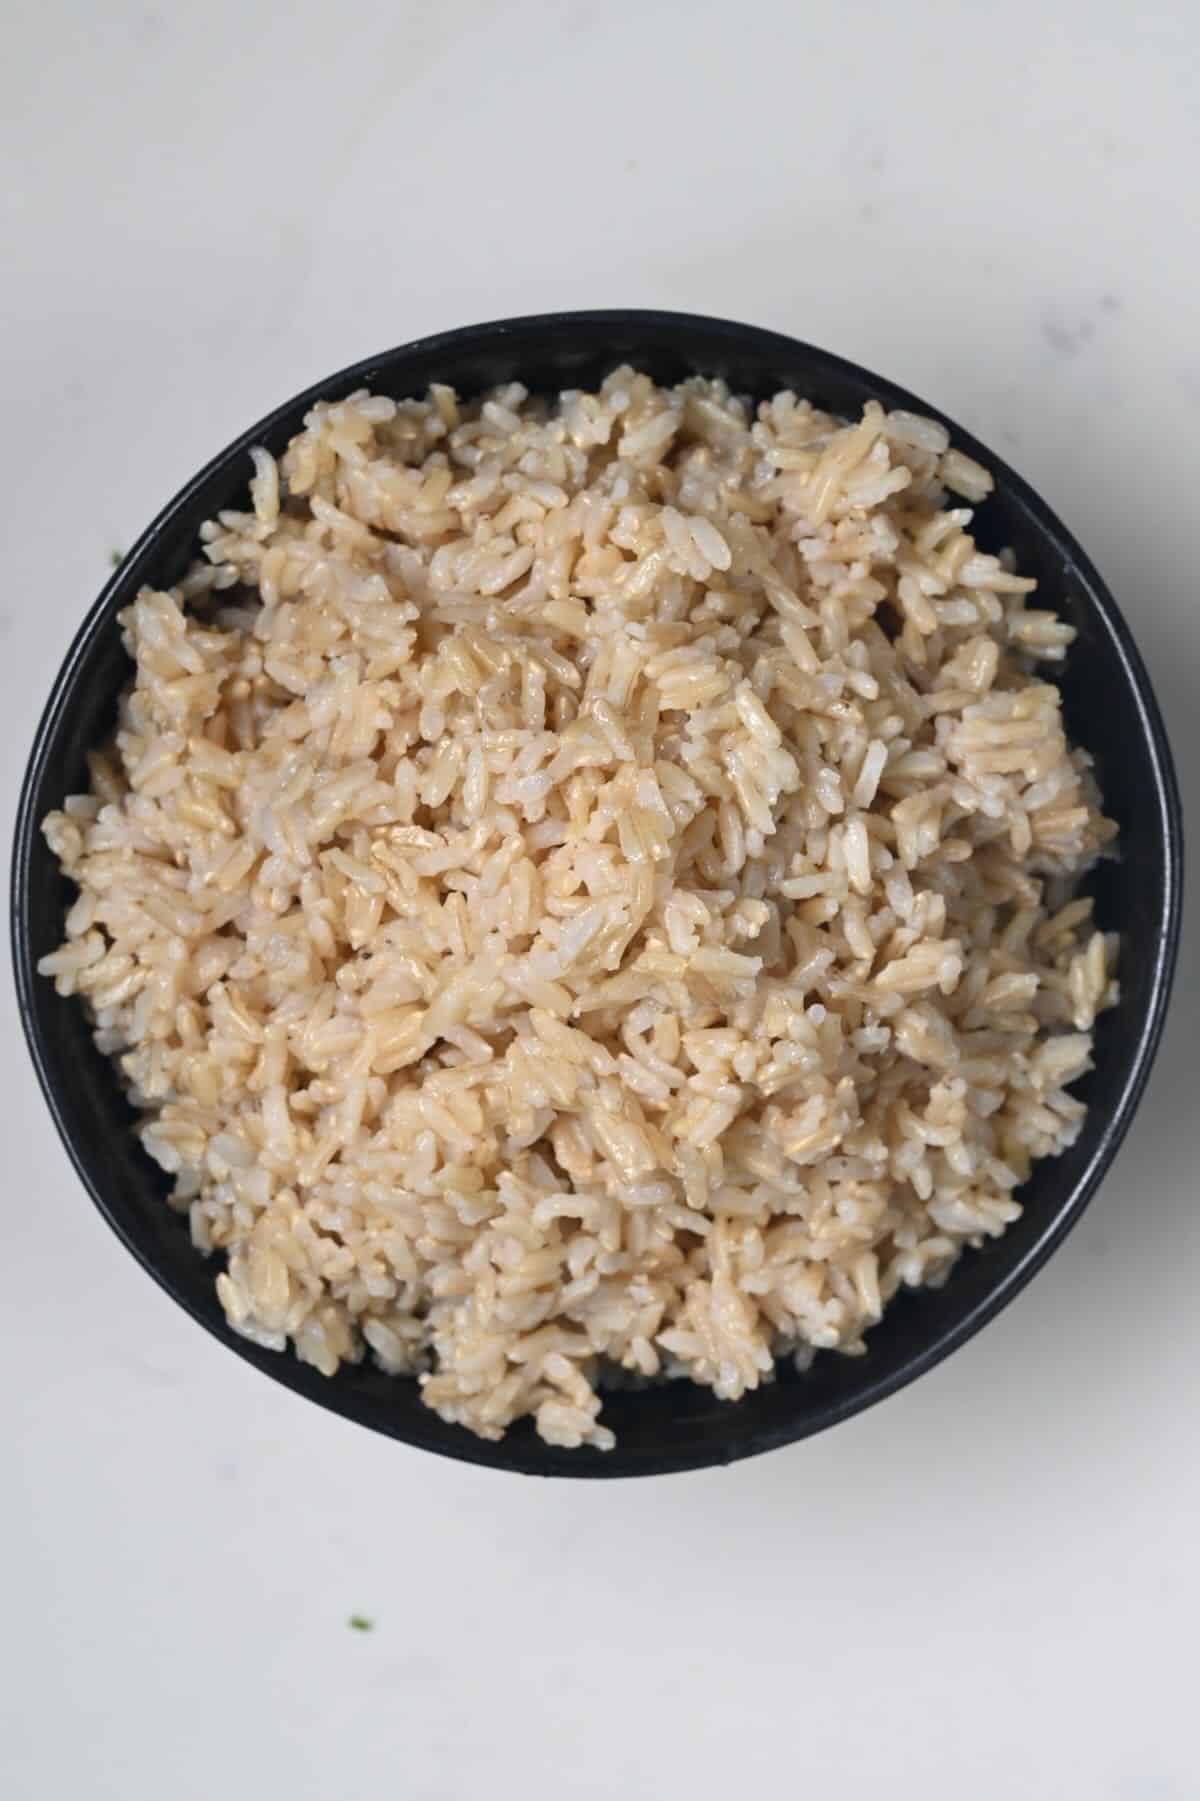 A serving of cooked brown rice